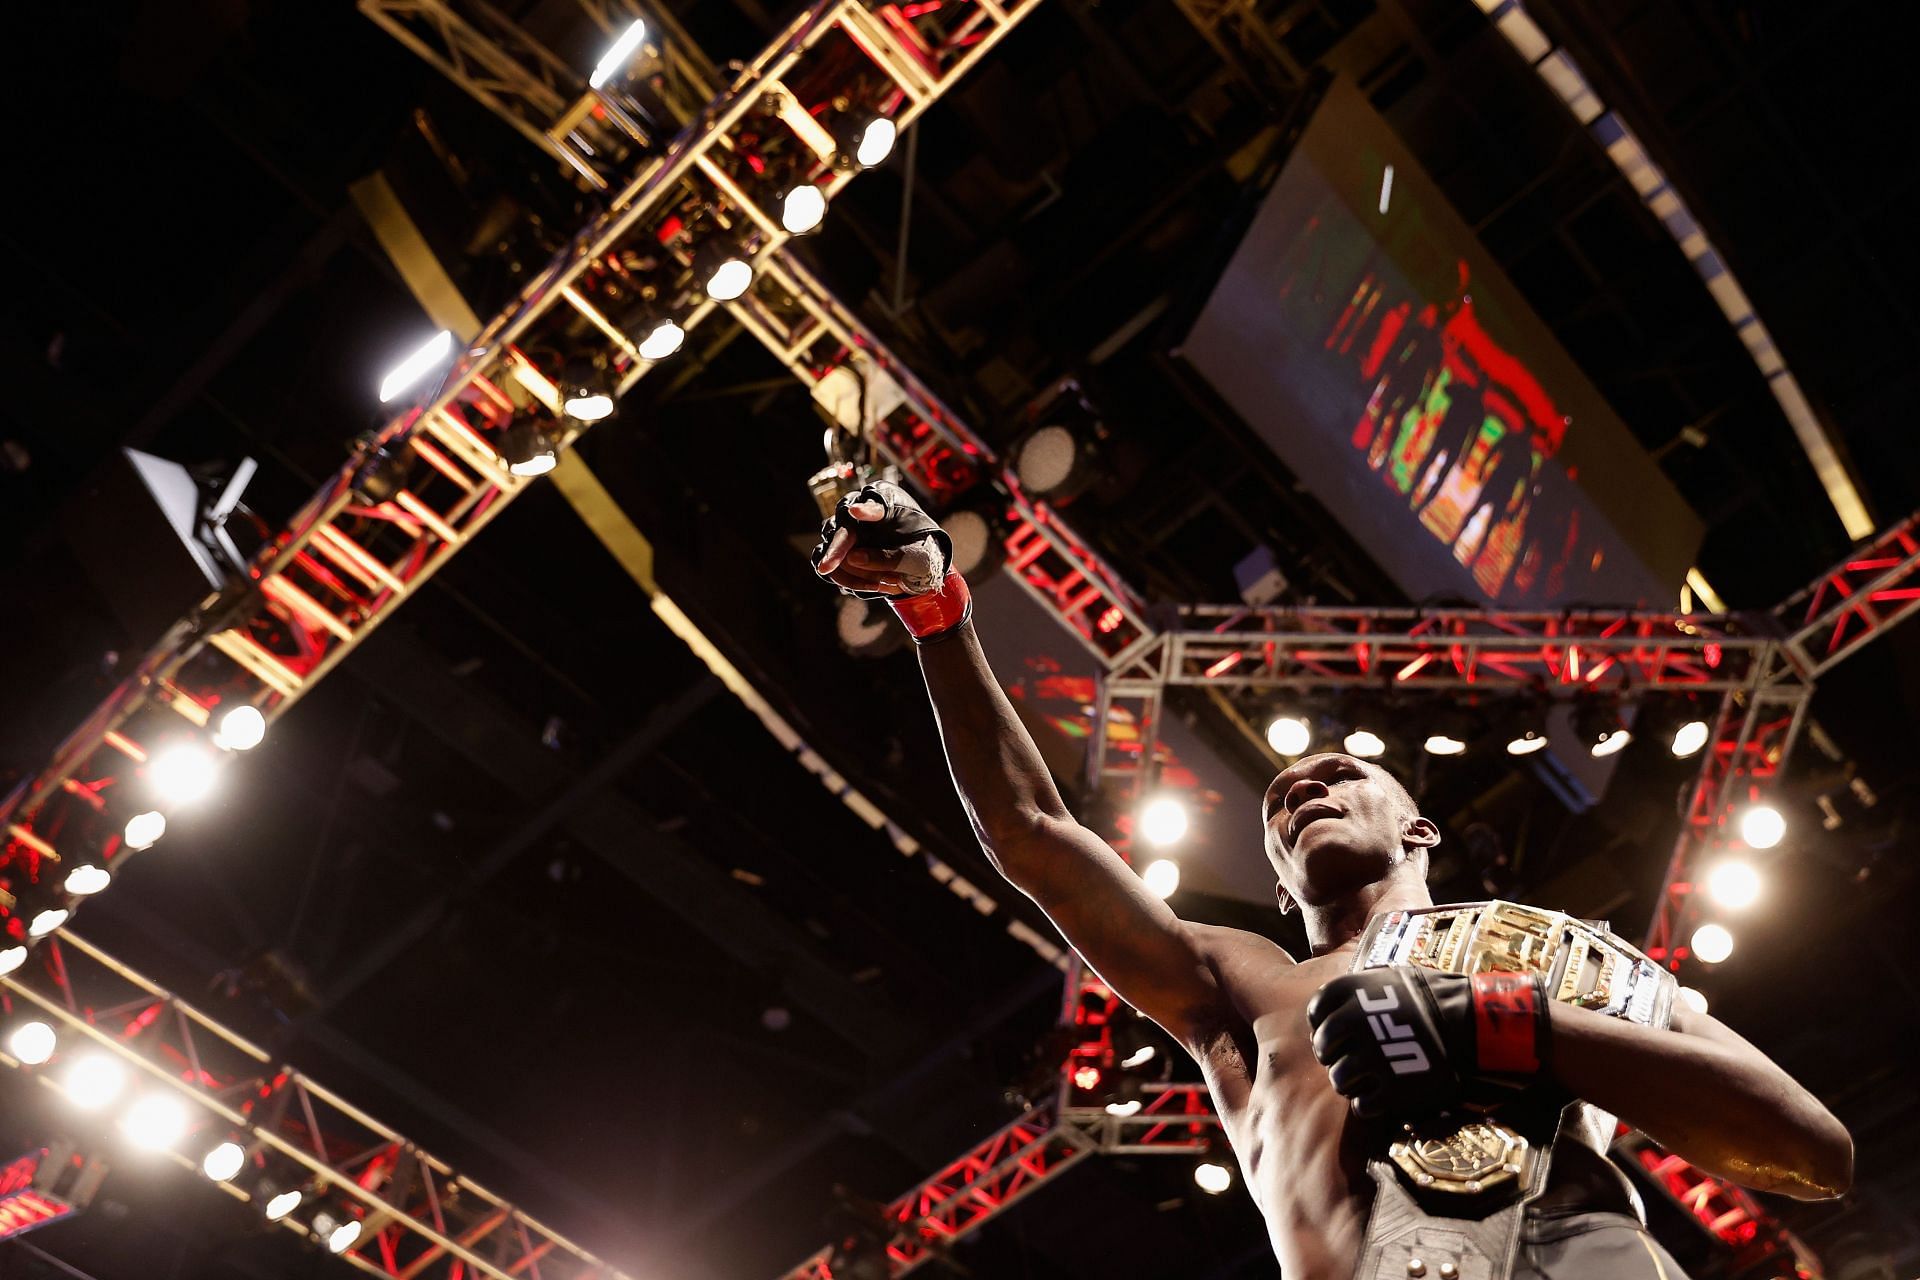 Israel Adesanya is the middleweight champion